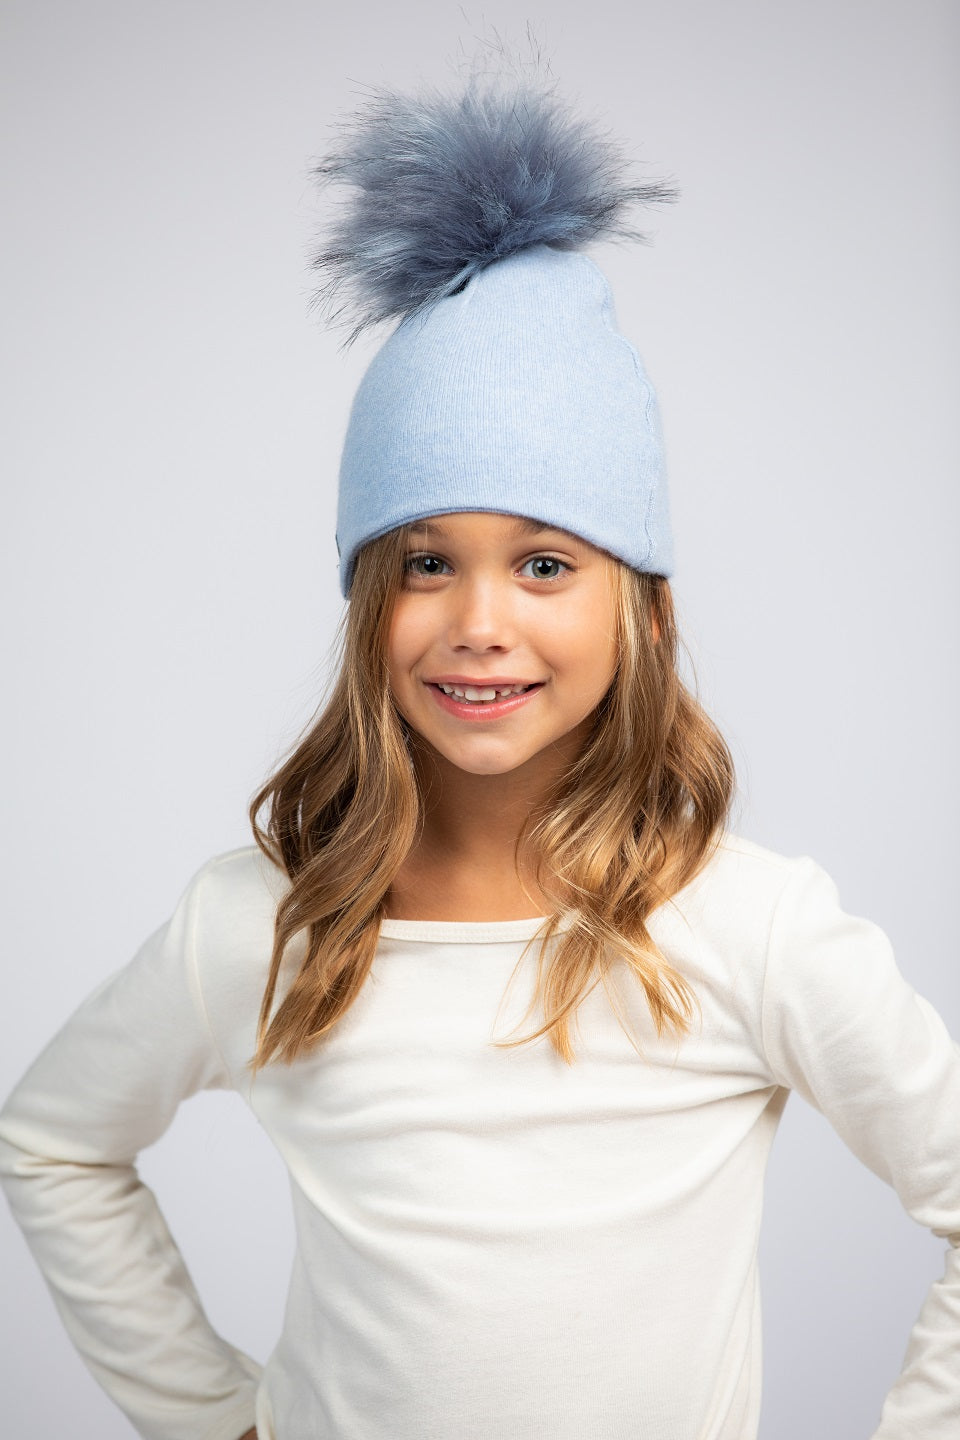 Baby Blue with Light Blue - Cashmere Beanie for Kids